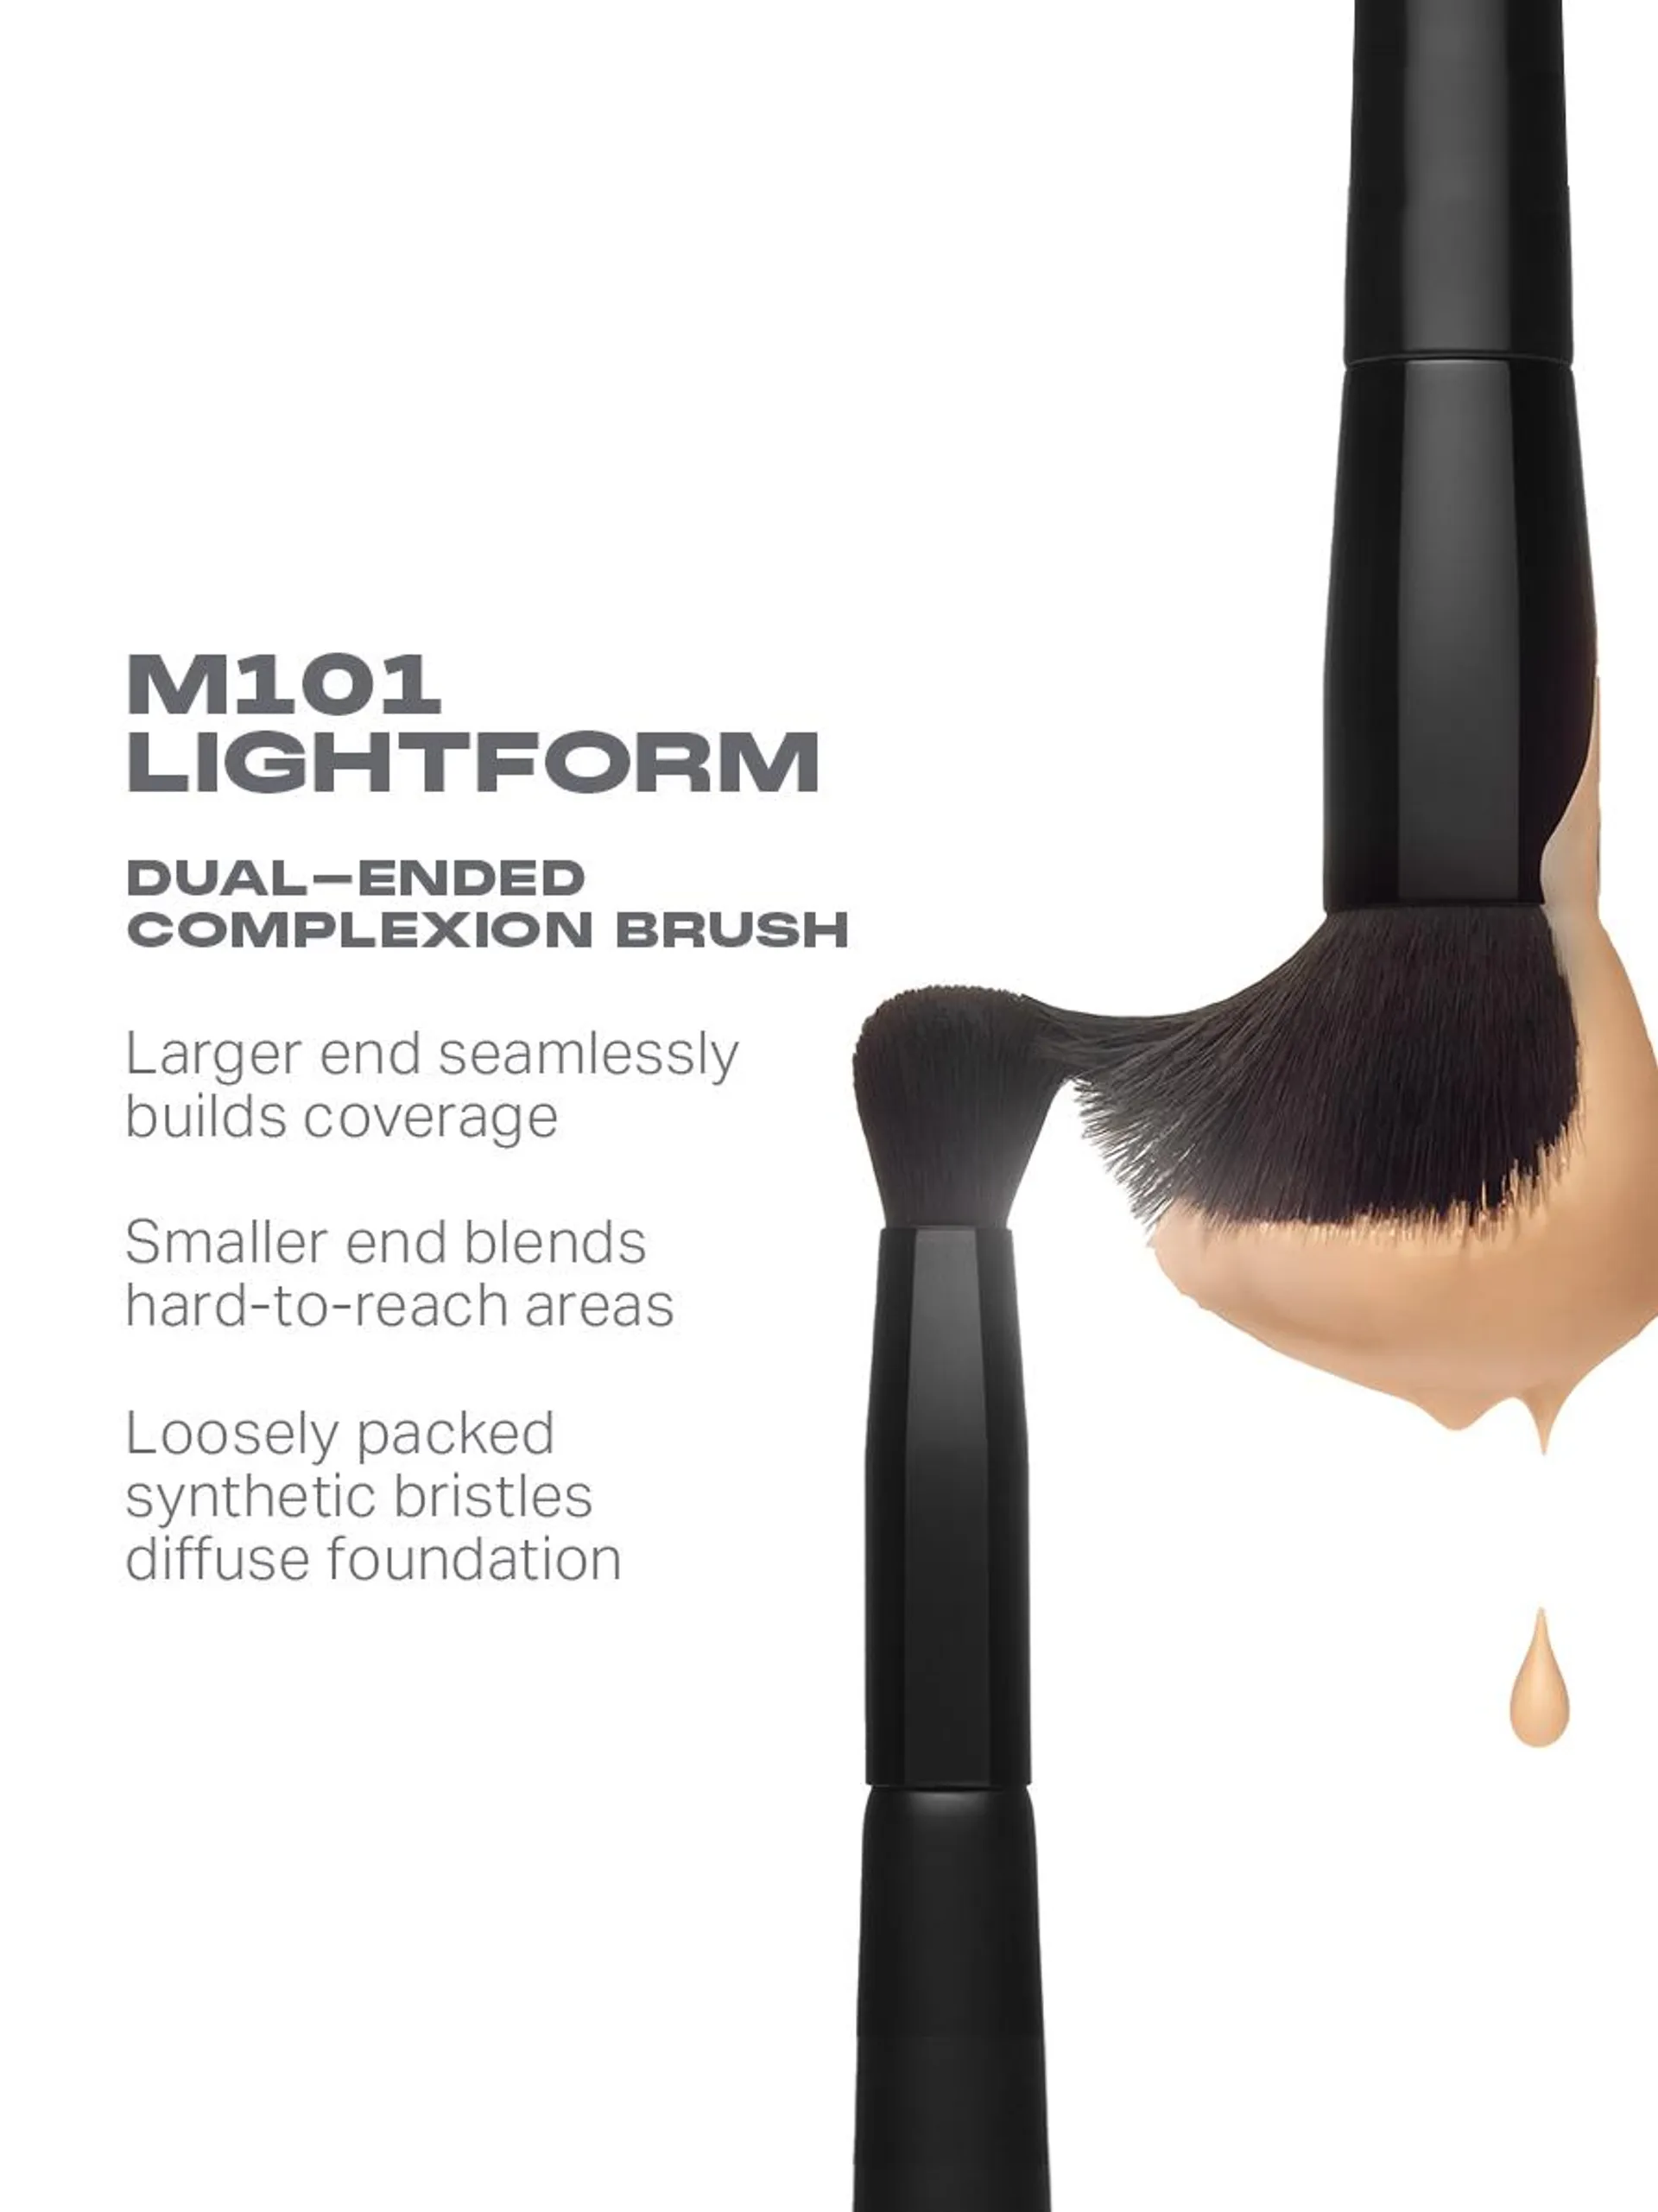 M101 Lightform Dual Ended Complexion Brush 27.8g